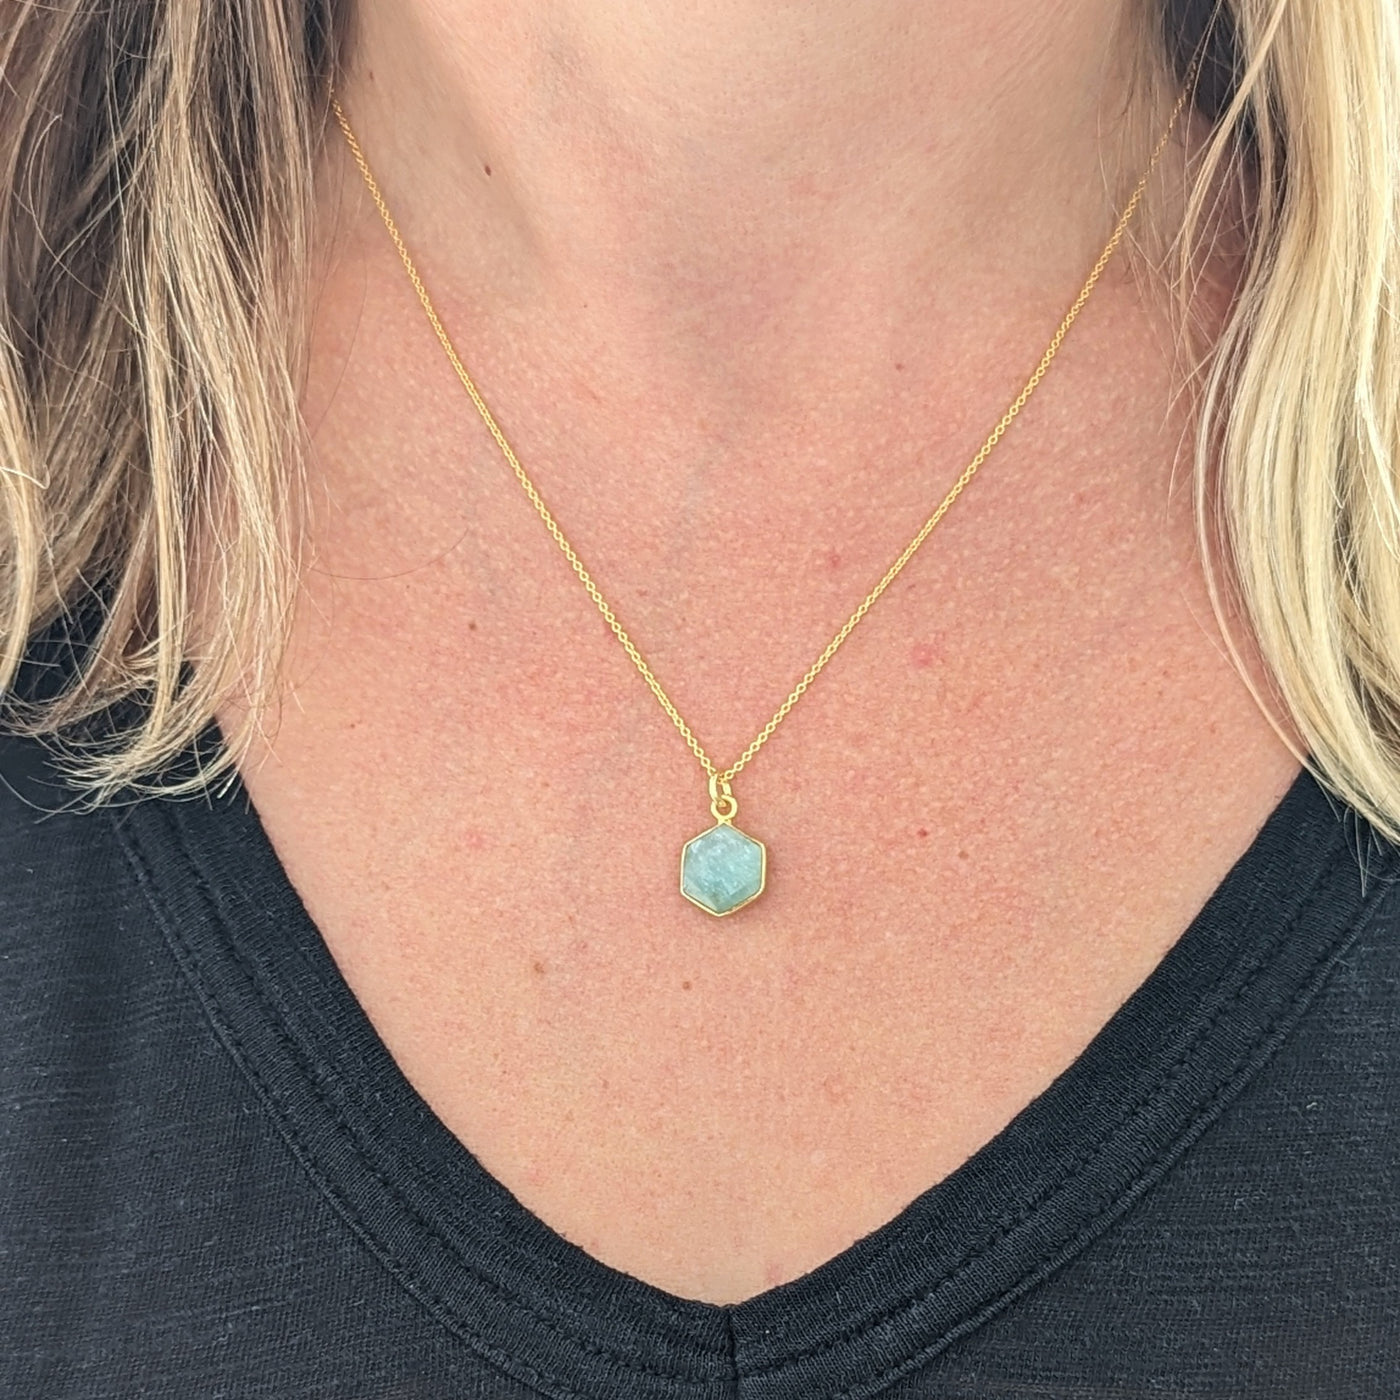 The Hexagon Amazonite Gemstone Necklace - 18ct Gold Plated